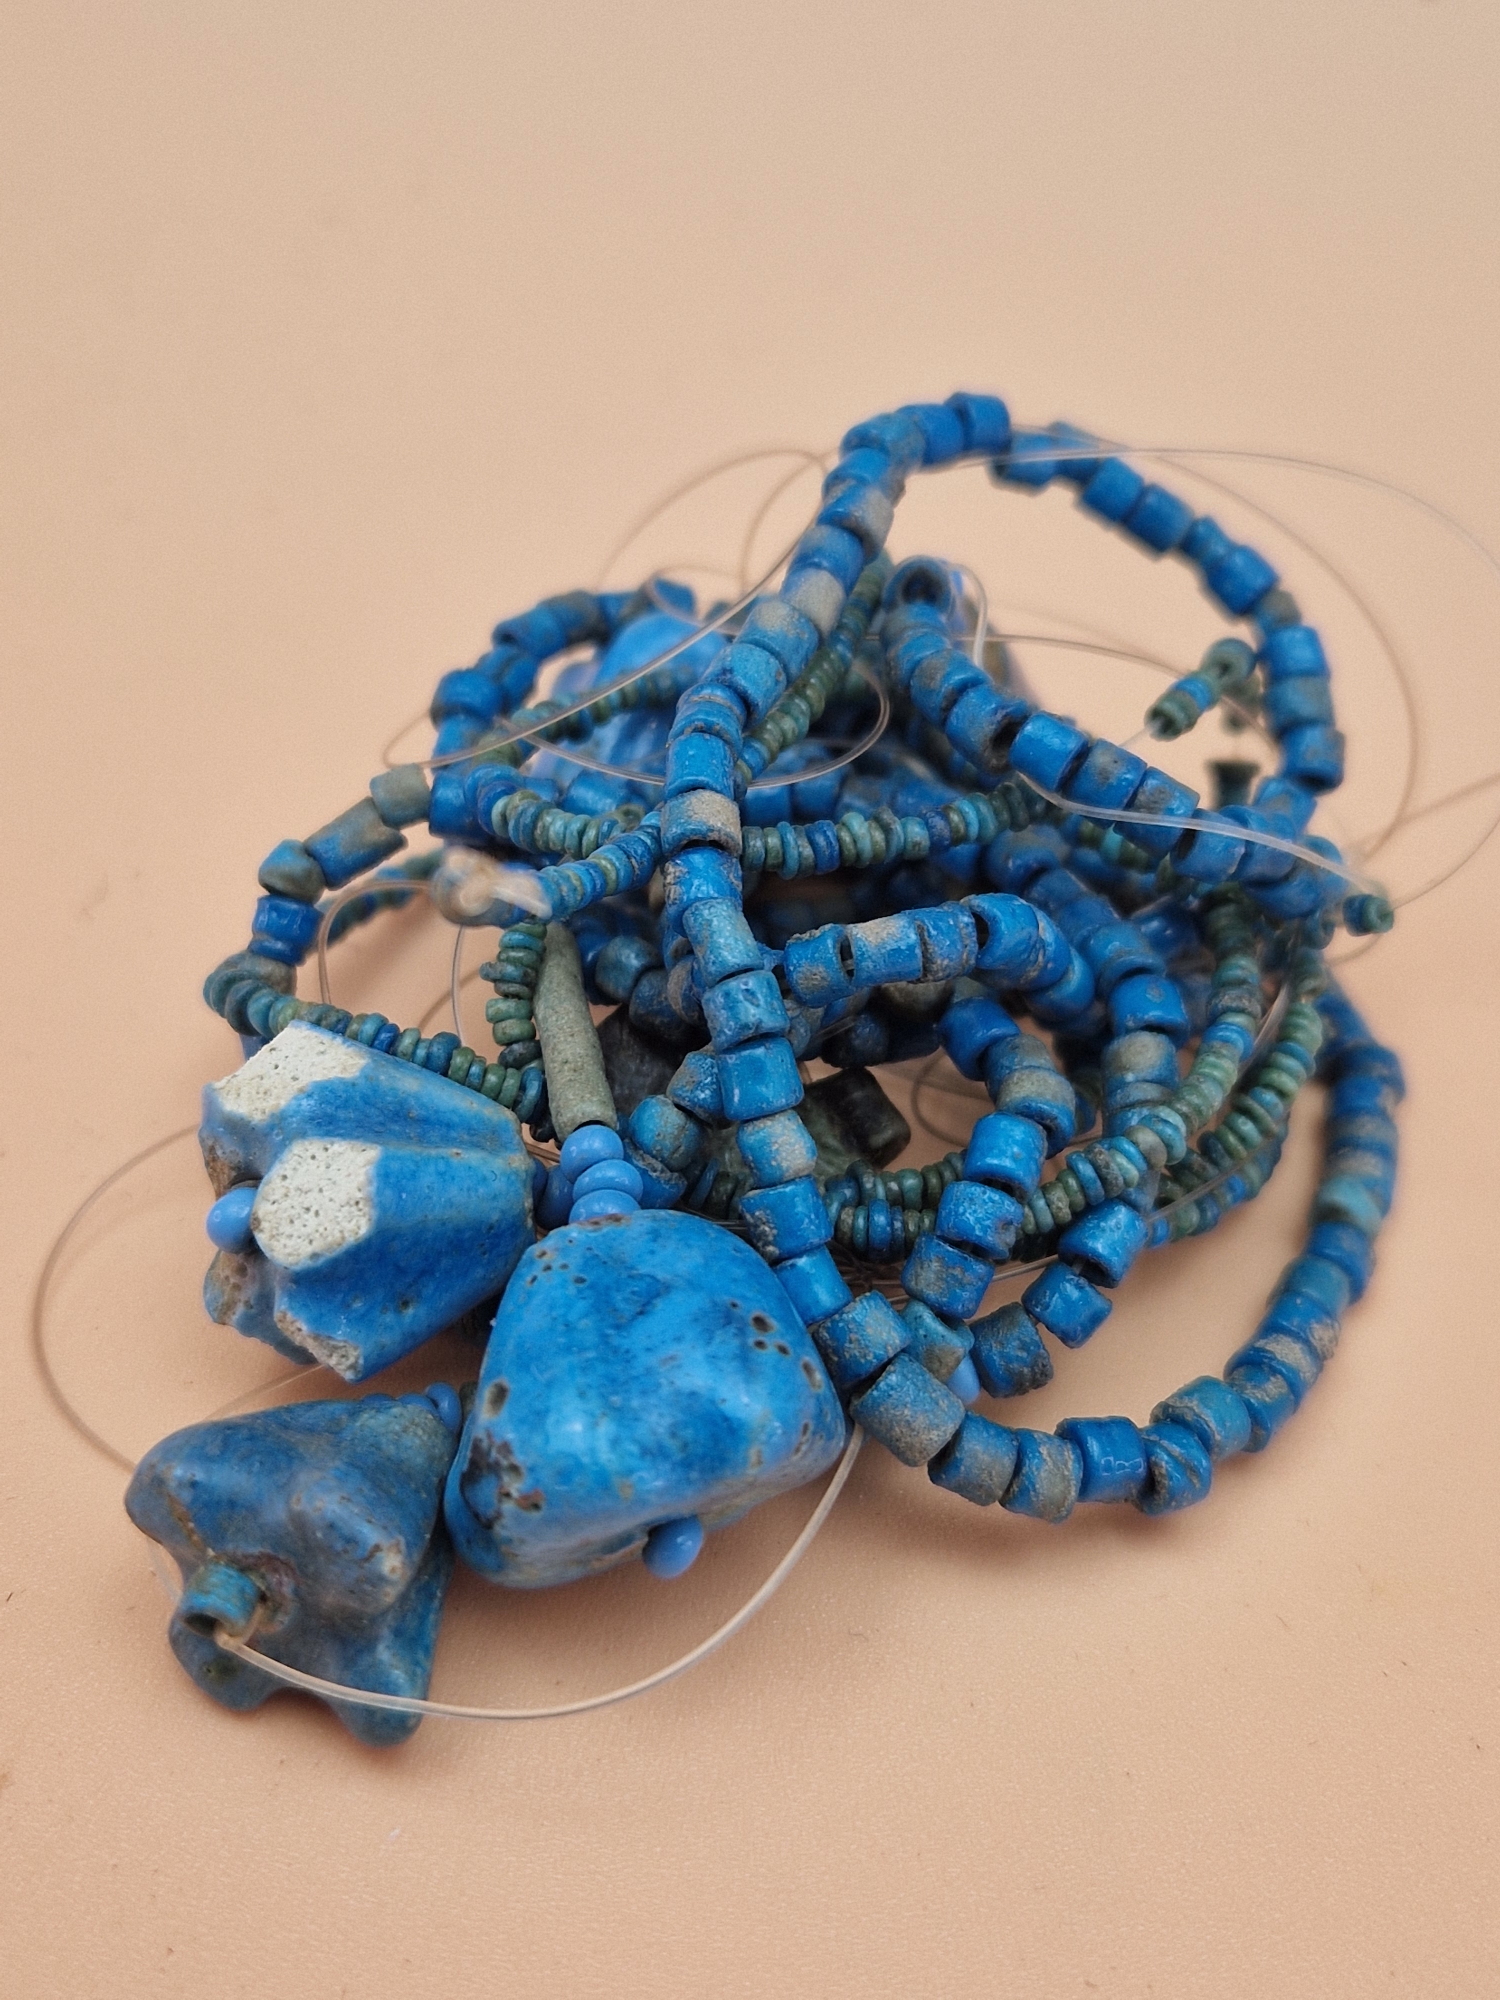 A COLLECTION OF EGYPTIAN BLUE AND GREY POTTERY BEAD WORKS